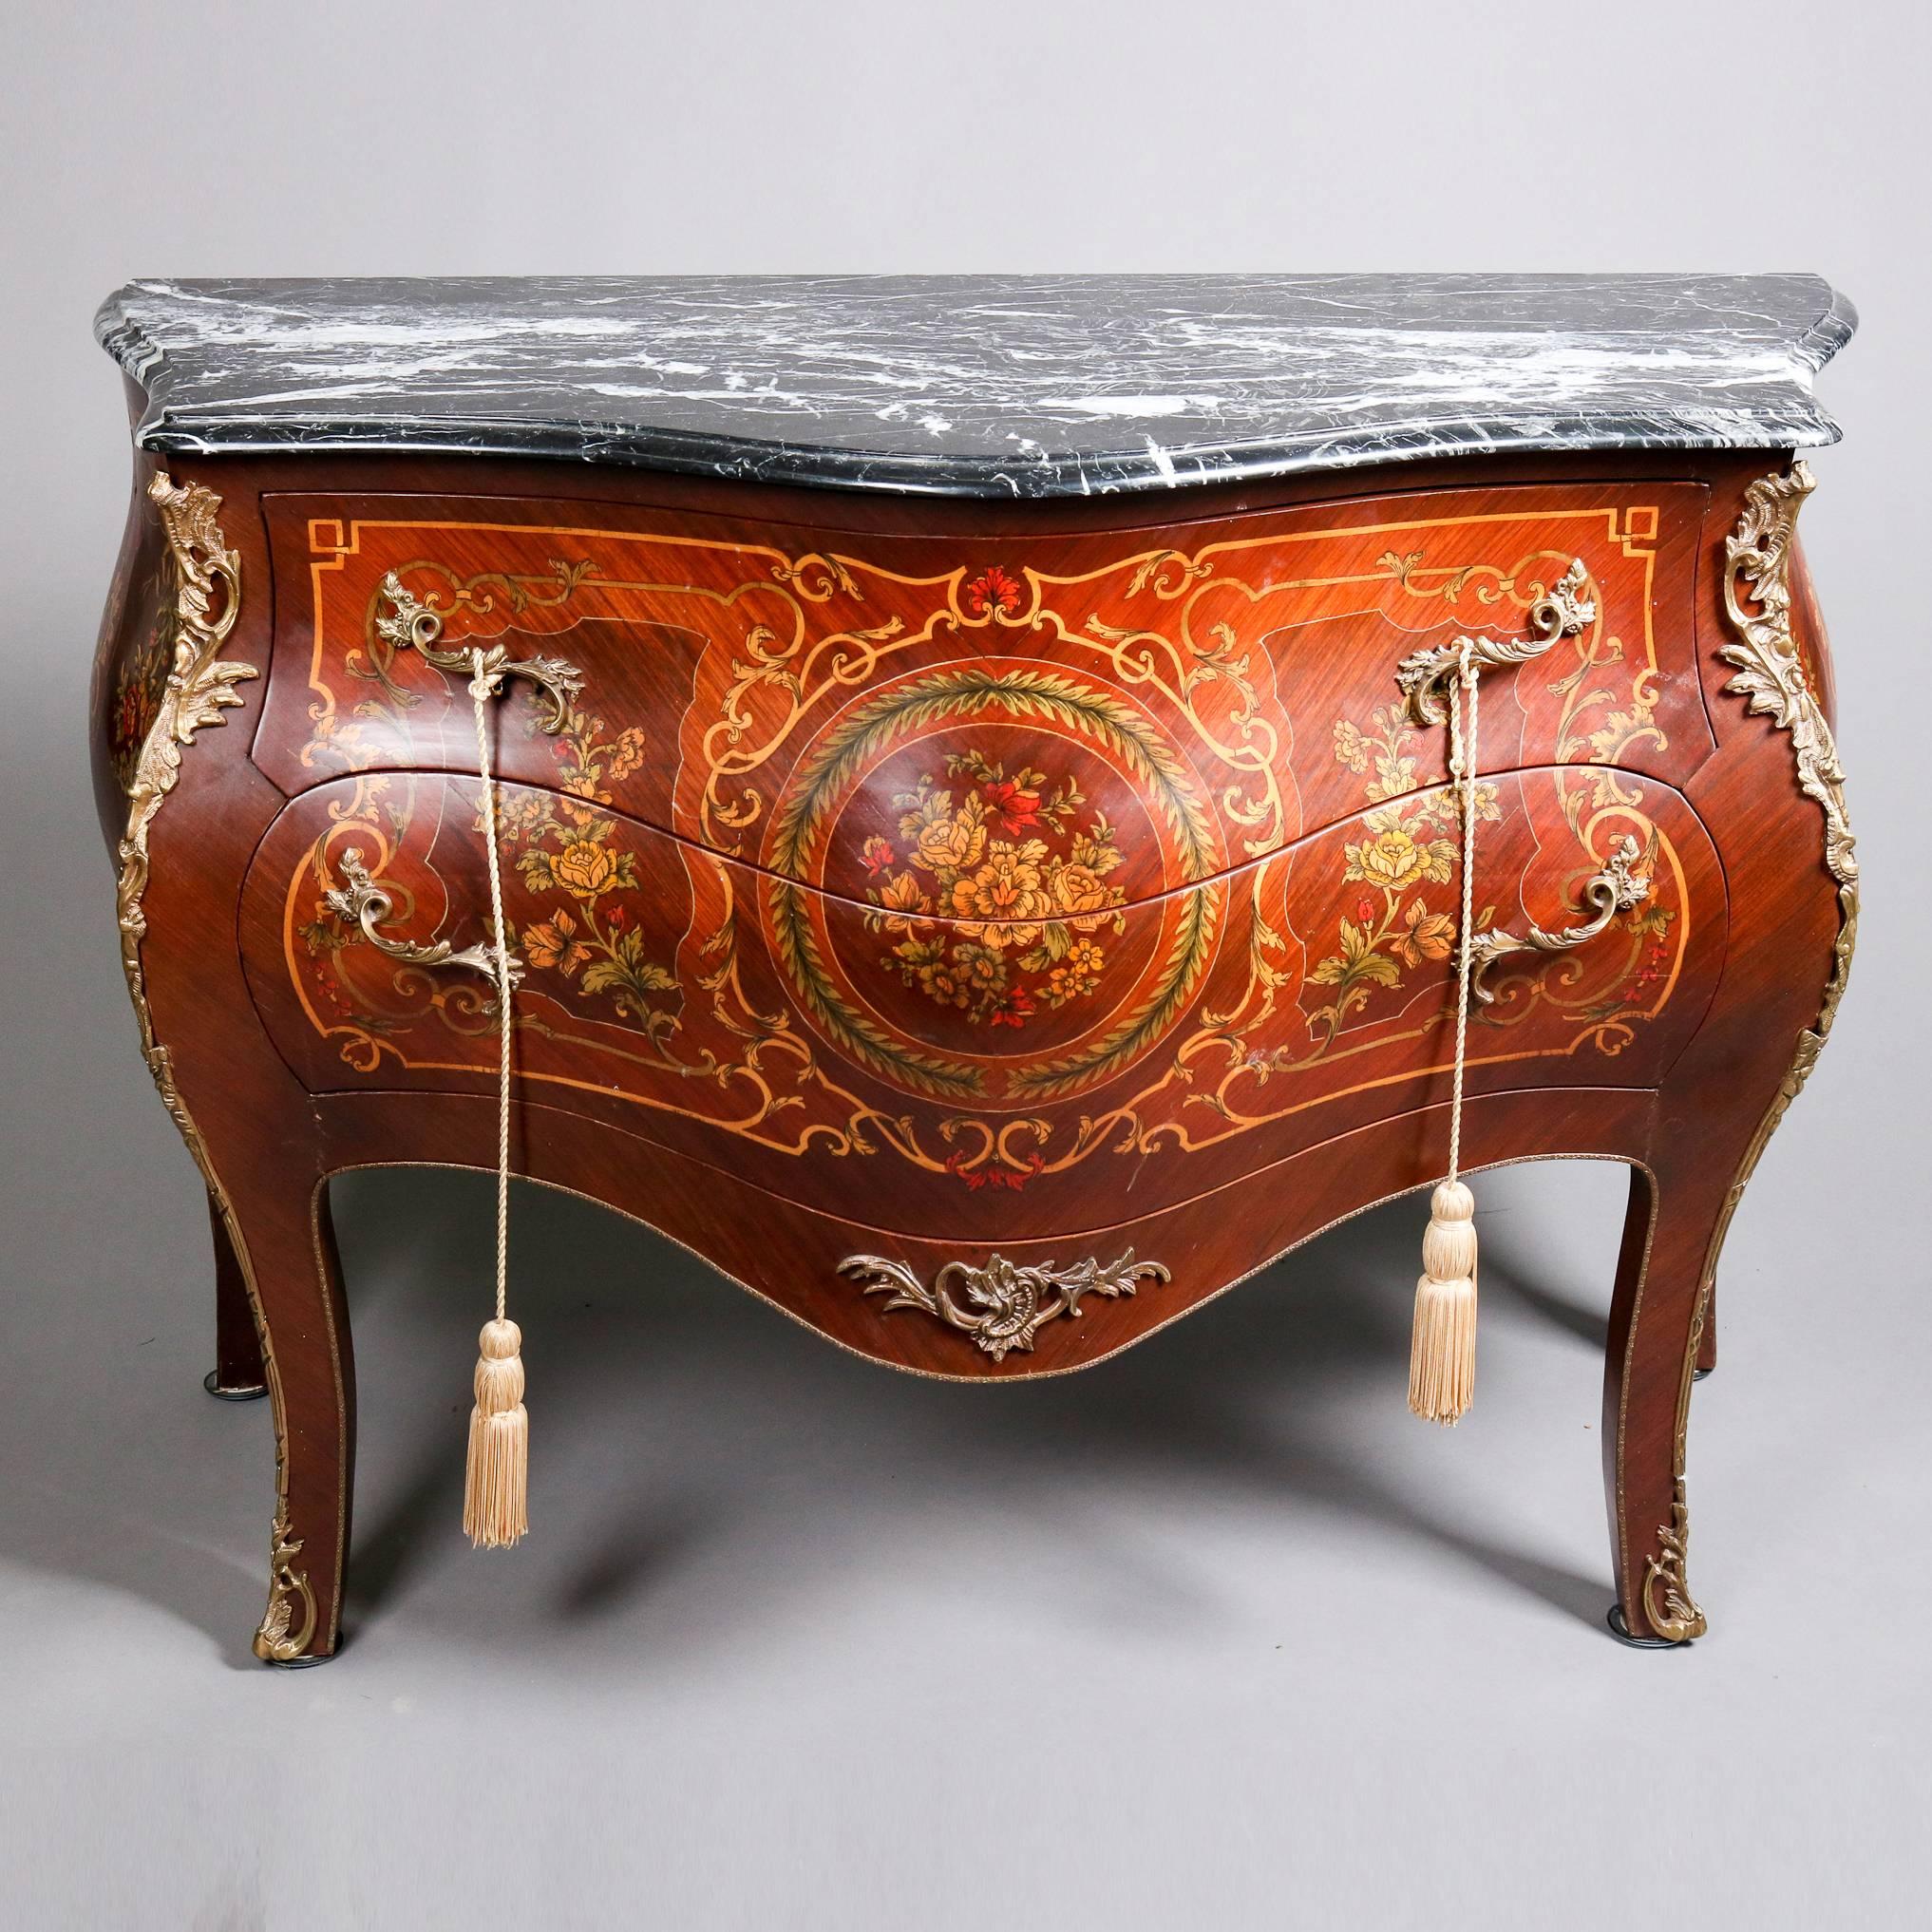 French Louis XV style hand-painted marble top mahogany two drawer commode features hand-painted floral, scroll and foliate design, cast foliate form bronze pulls, 20th century

Measures - 35